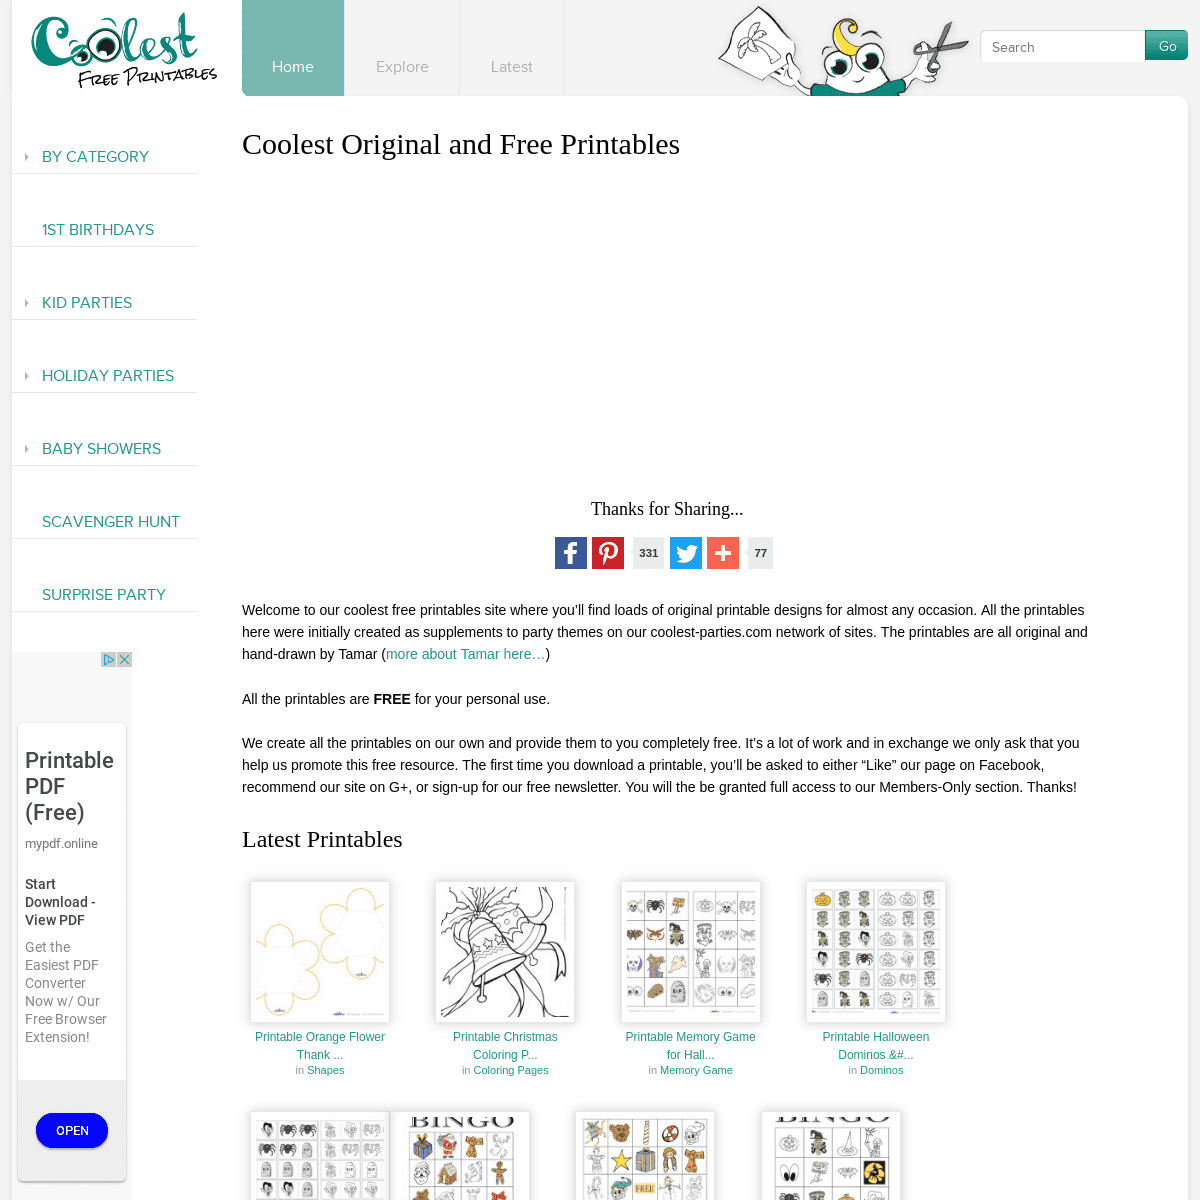 A complete backup of coolest-free-printables.com